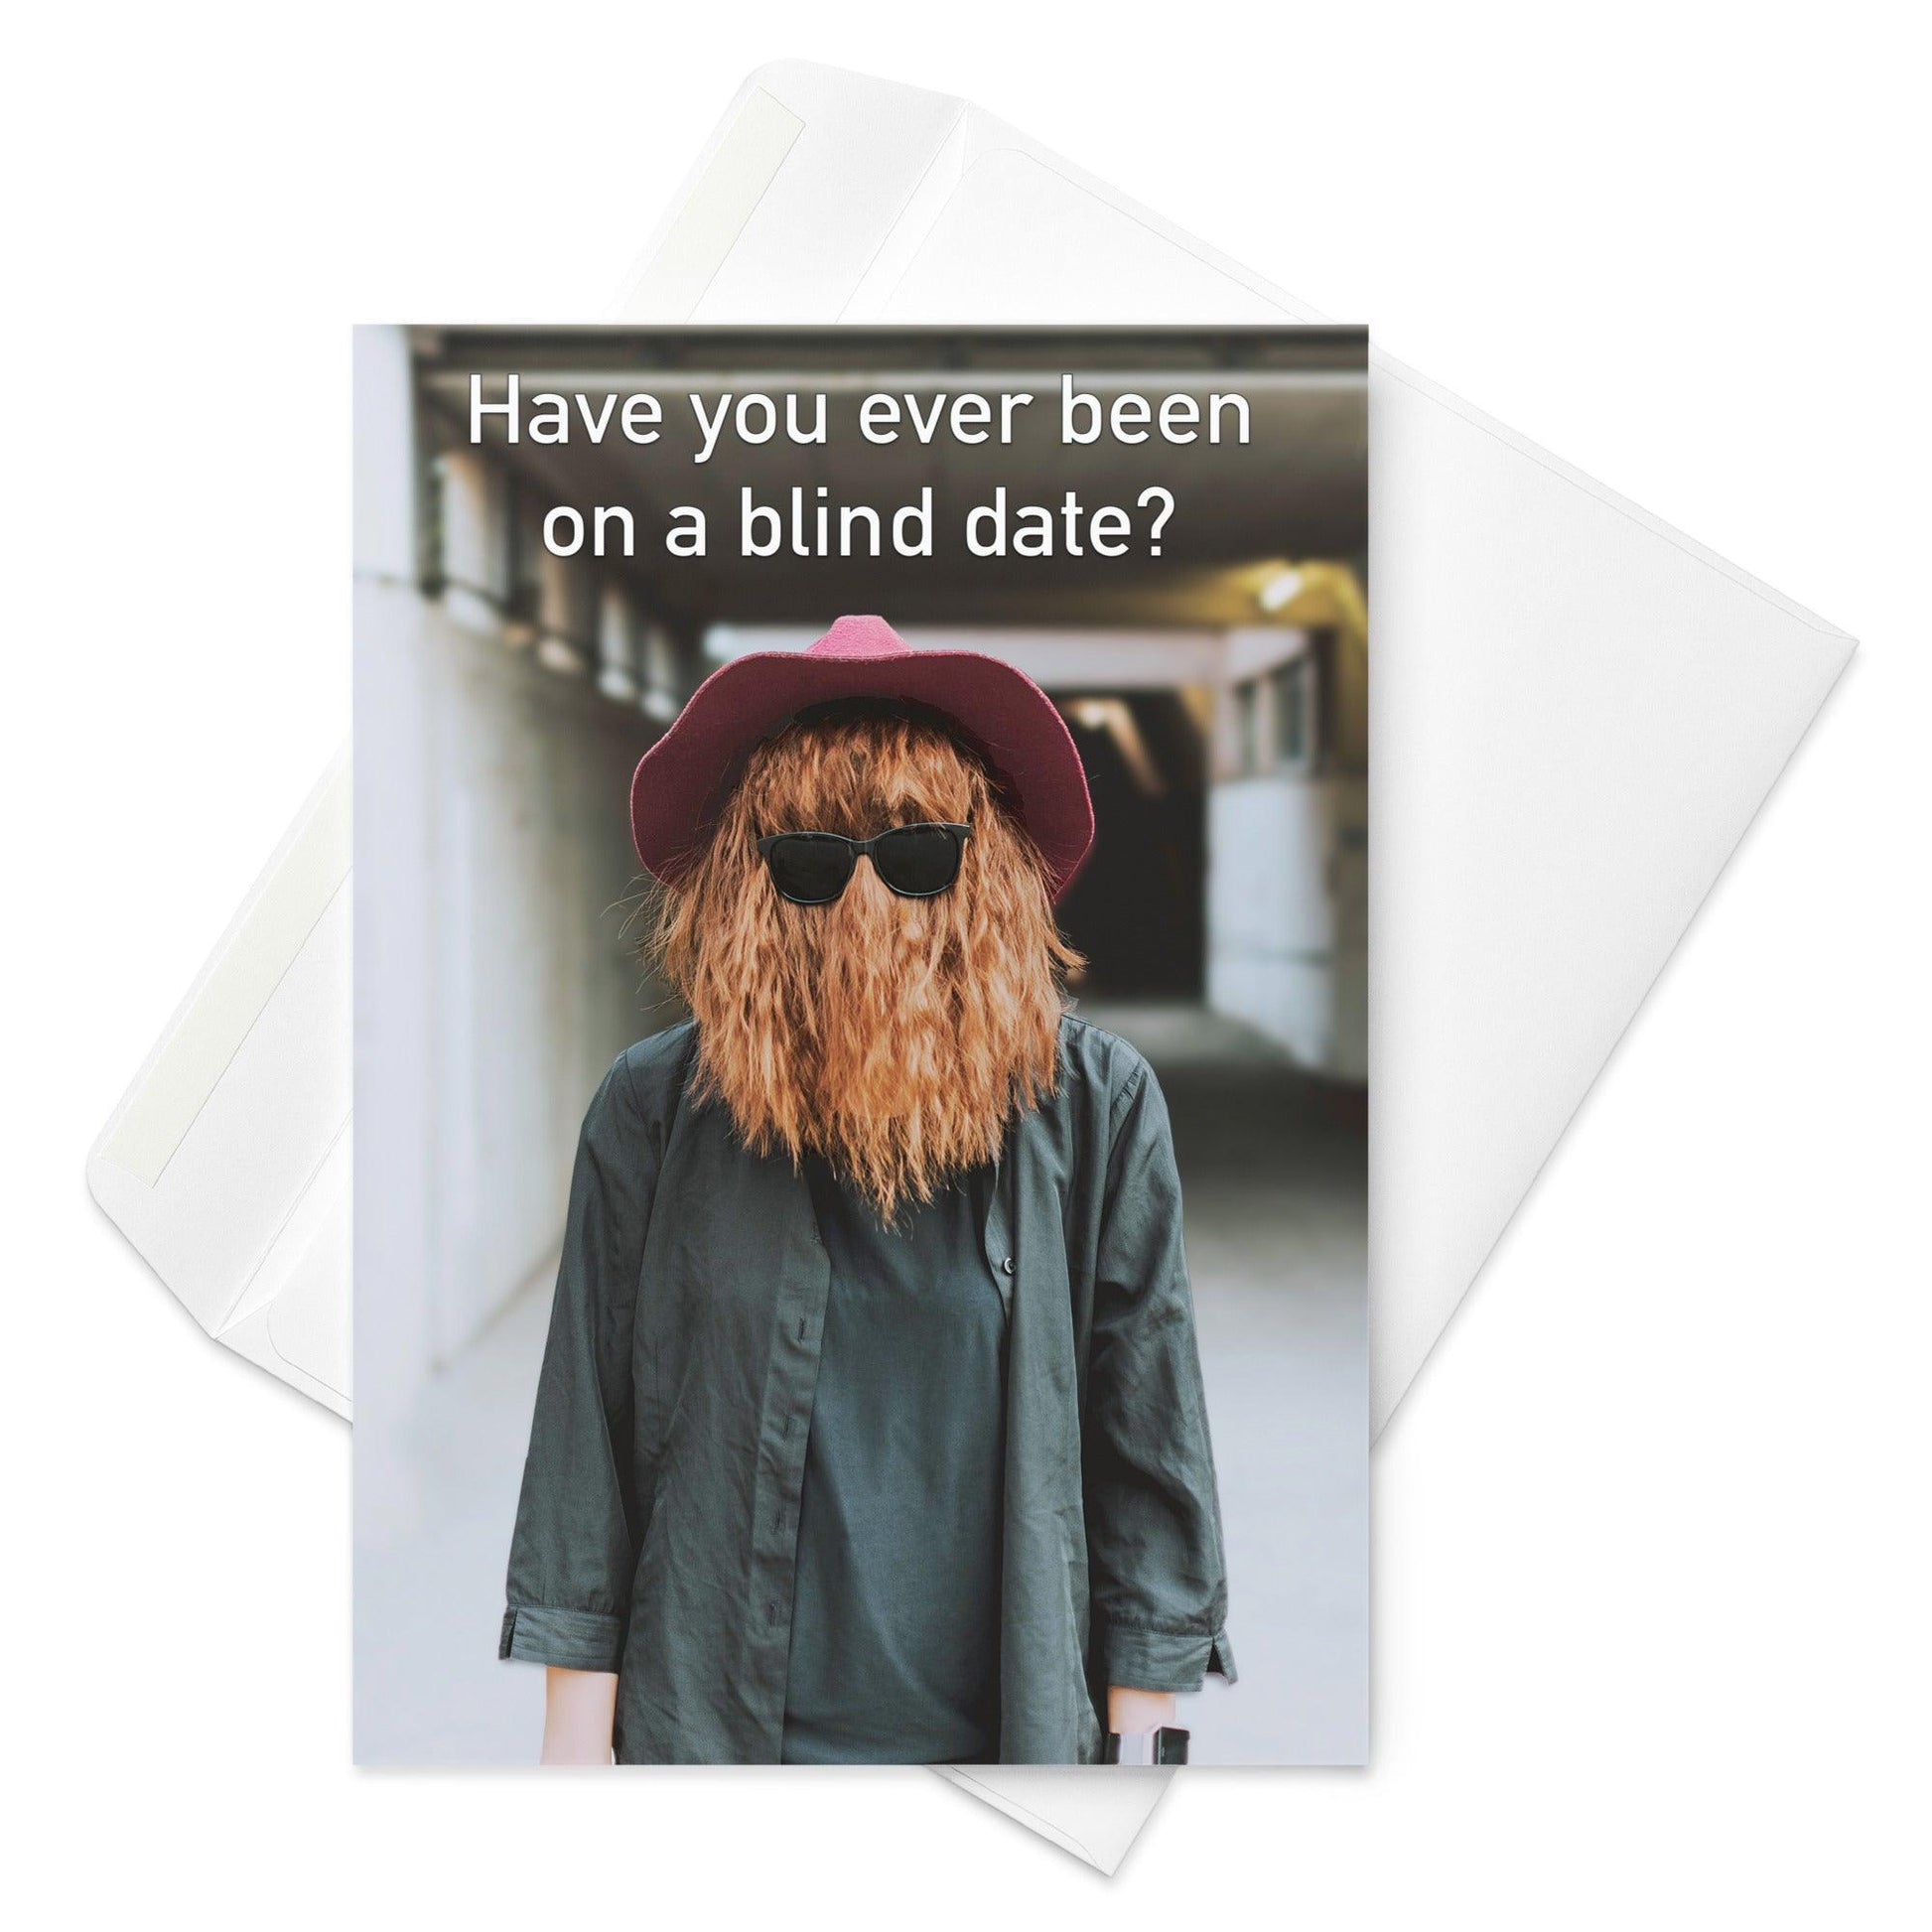 Have You Ever Been On A Blind Date - Note Card - iSAW Company